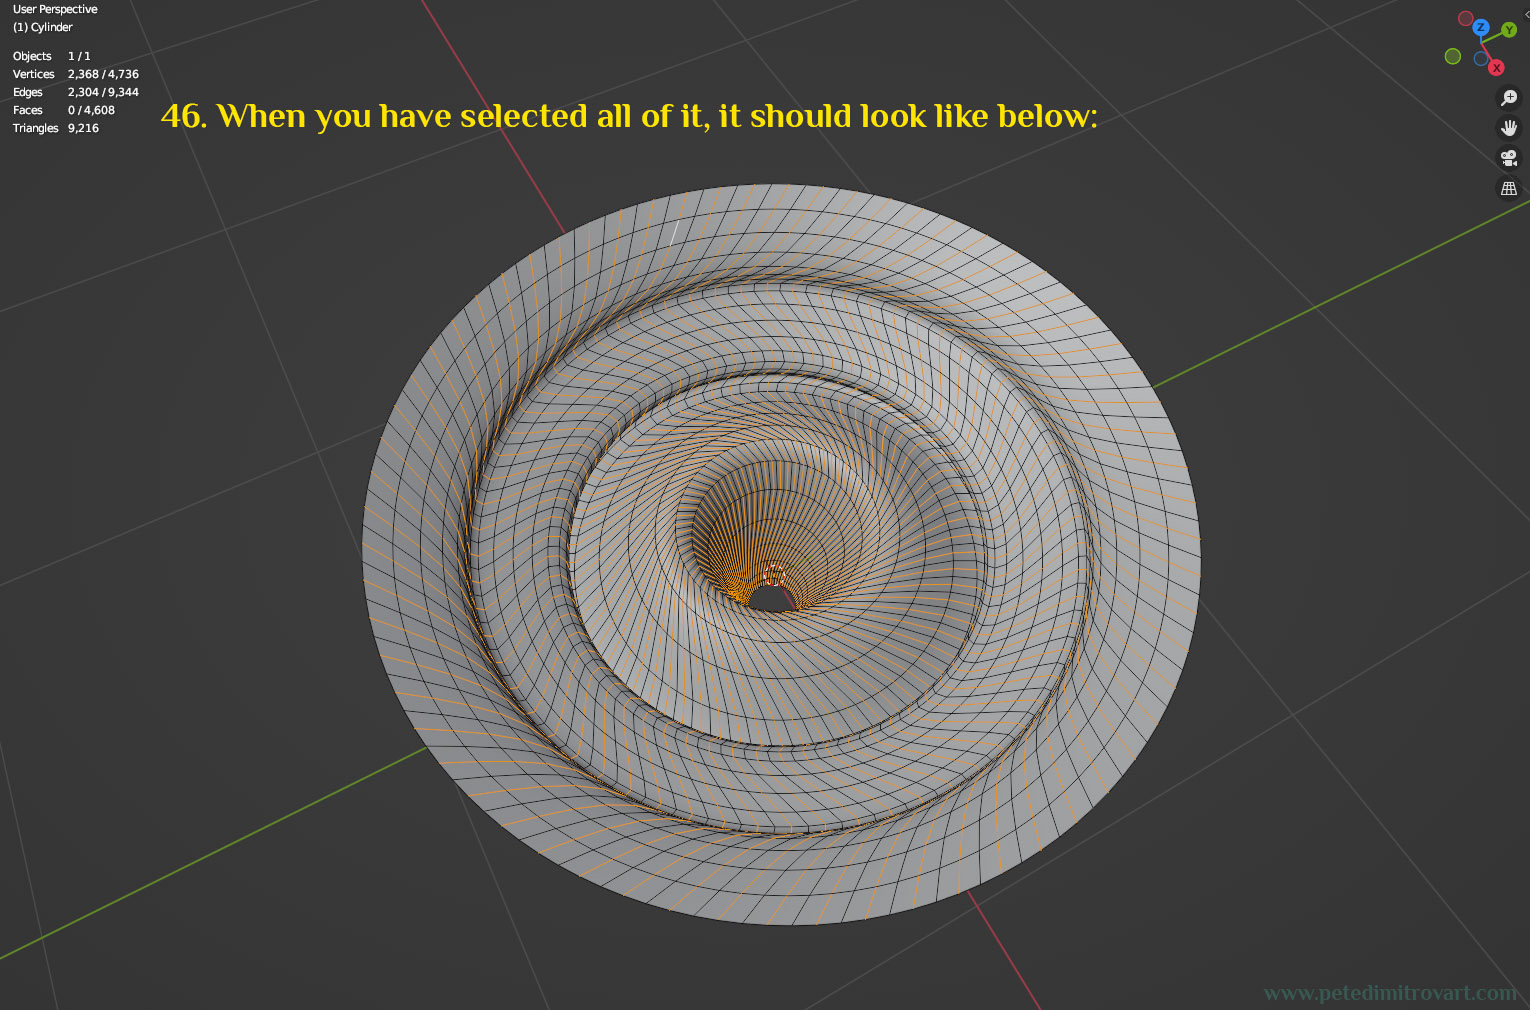 Mesh seen from above. Every second loop of edges is selected, shading the mesh in orange selection color.